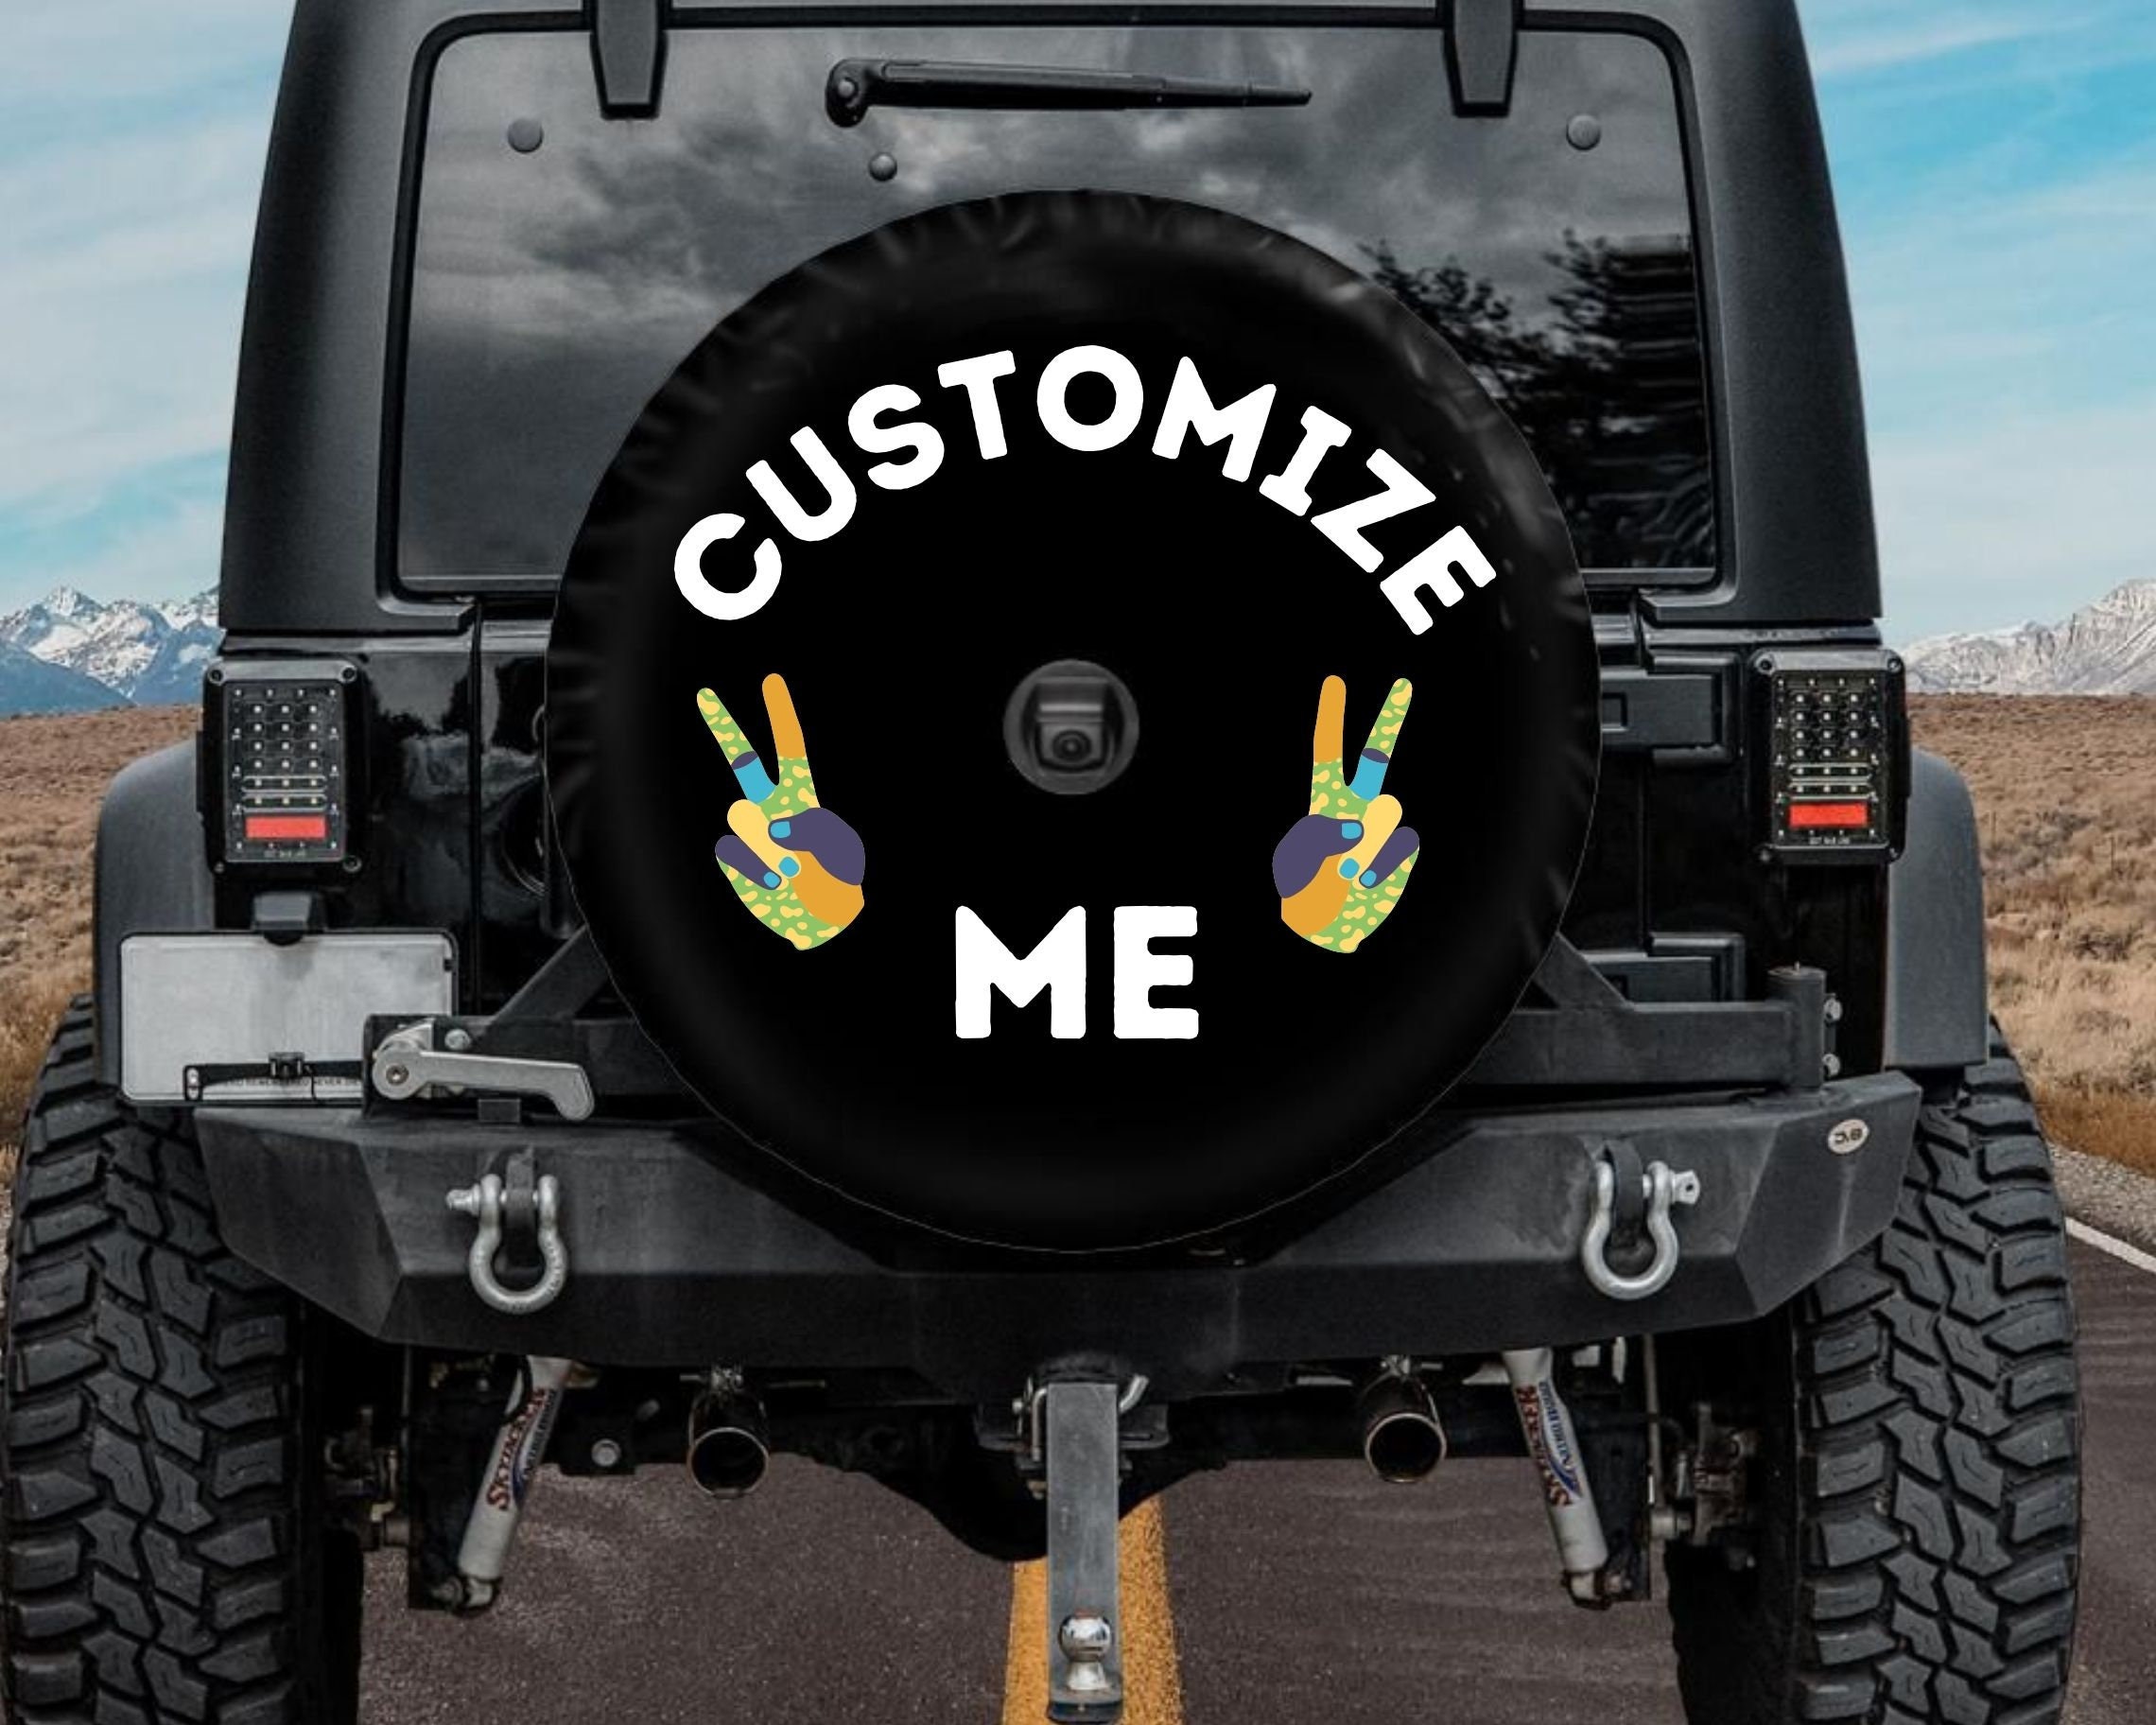 CUSTOM Spare Tire Cover Custom Tire Cover With Your Design - Etsy